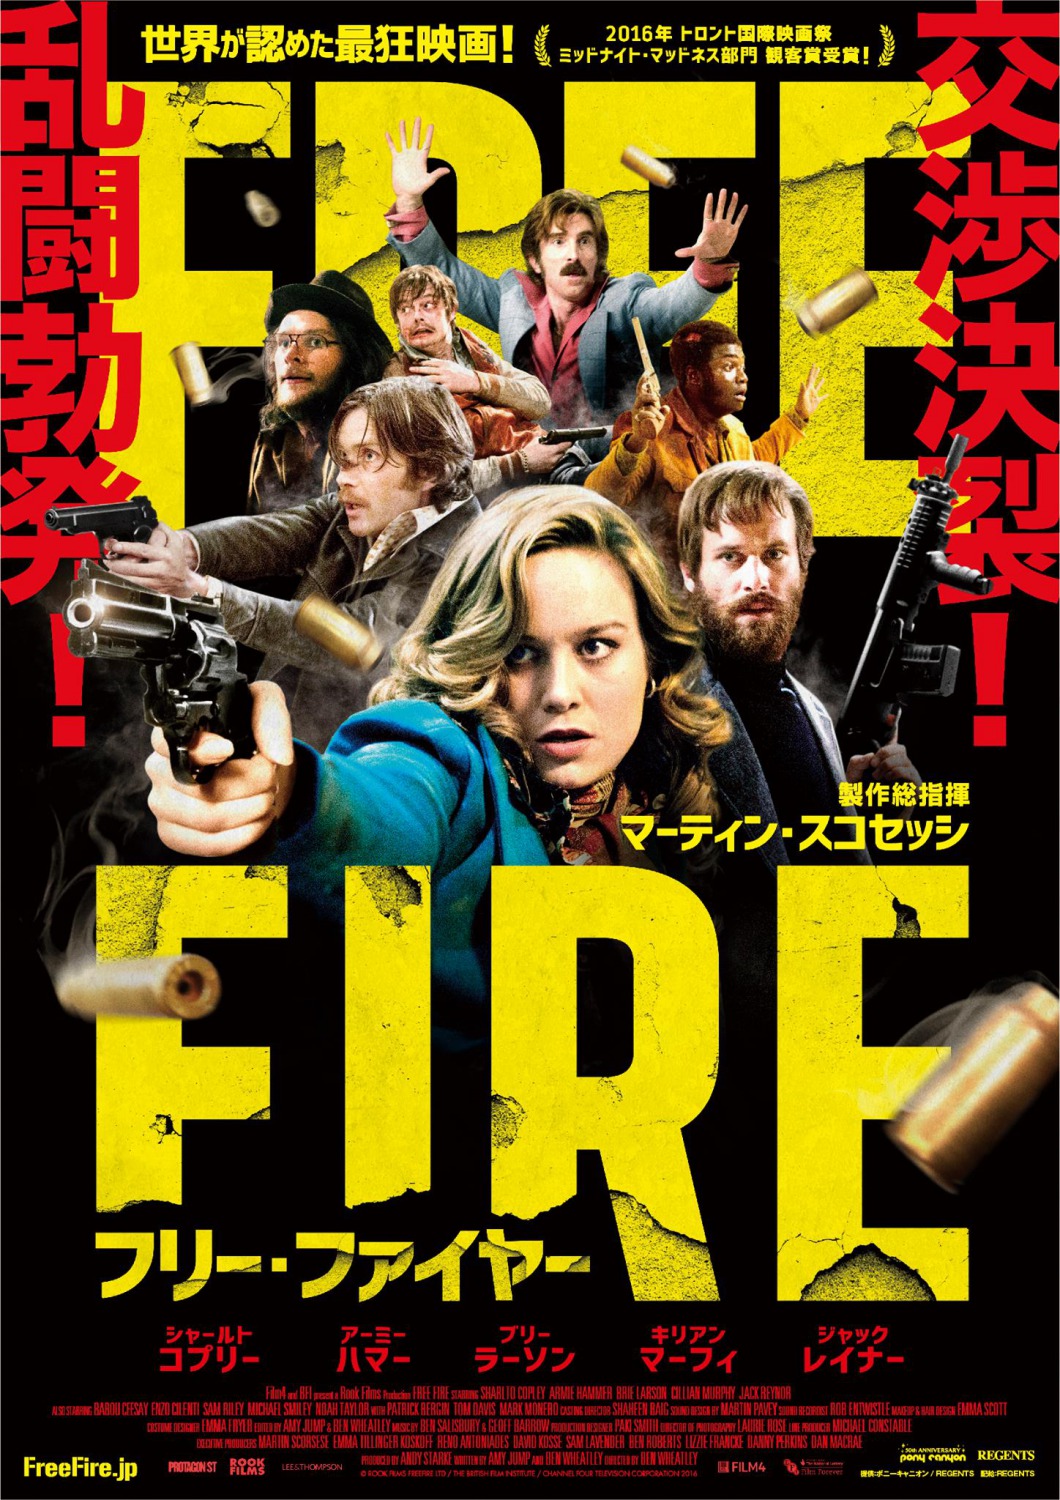 Extra Large Movie Poster Image for Free Fire (#14 of 28)